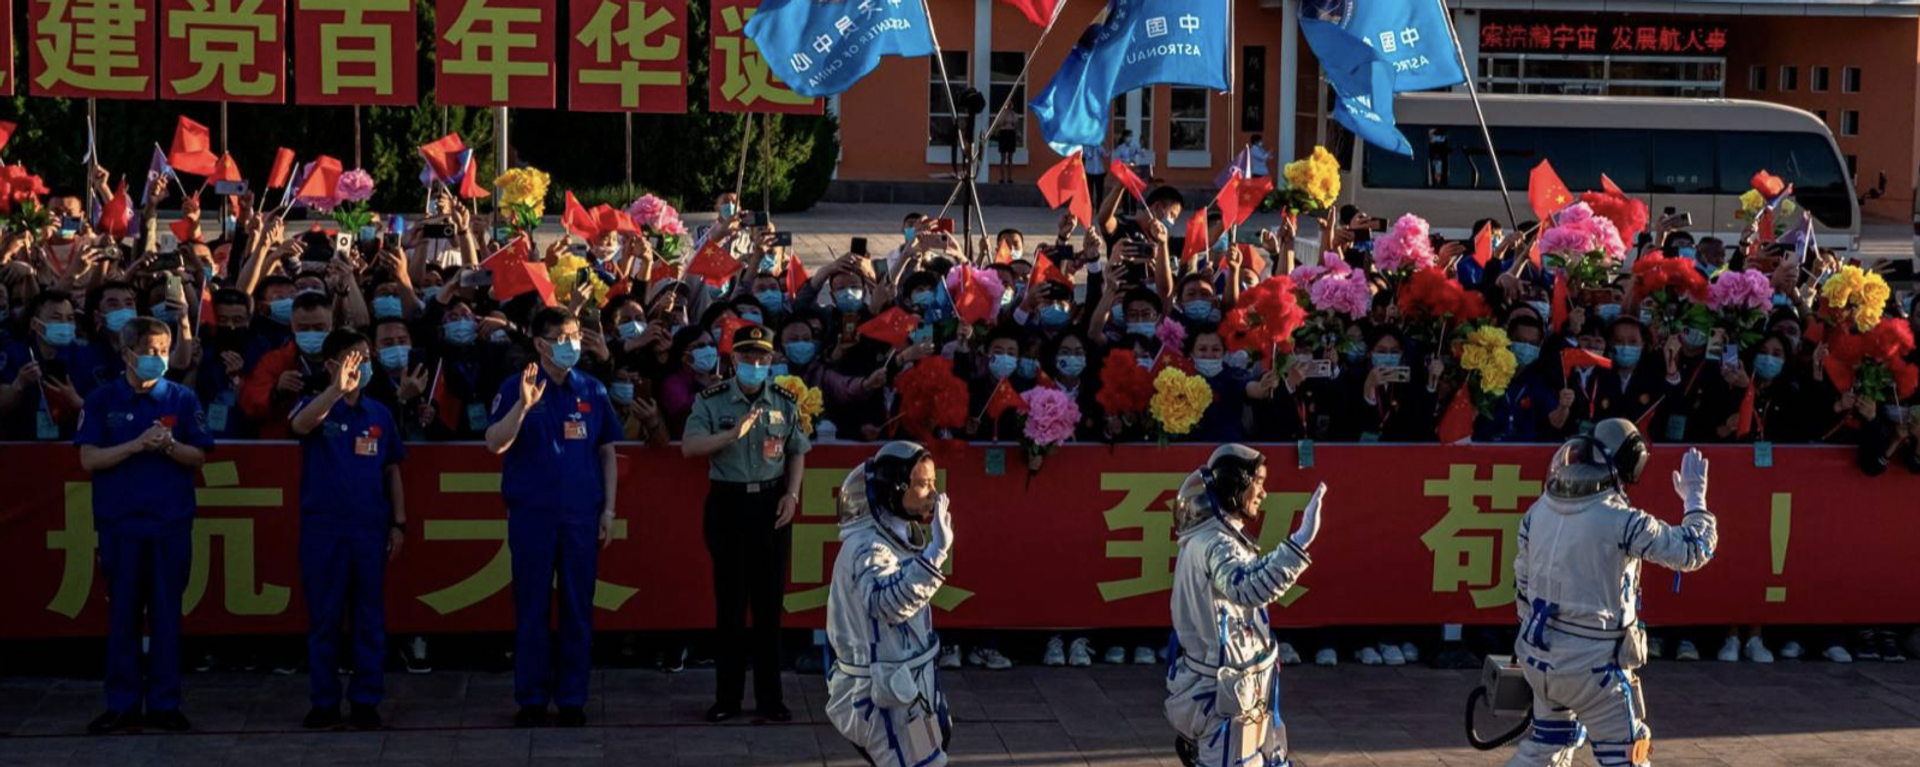 Astronauts Nie Haisheng (R), Liu Boming (C) and Tang Hongbo wave during a departure ceremony before boarding the Shenzhou-12 spacecraft on a Long March-2F carrier rocket at the Jiuquan Satellite Launch Centre in the Gobi desert, in northwest China on June 17, 2021. - 俄罗斯卫星通讯社, 1920, 29.12.2022